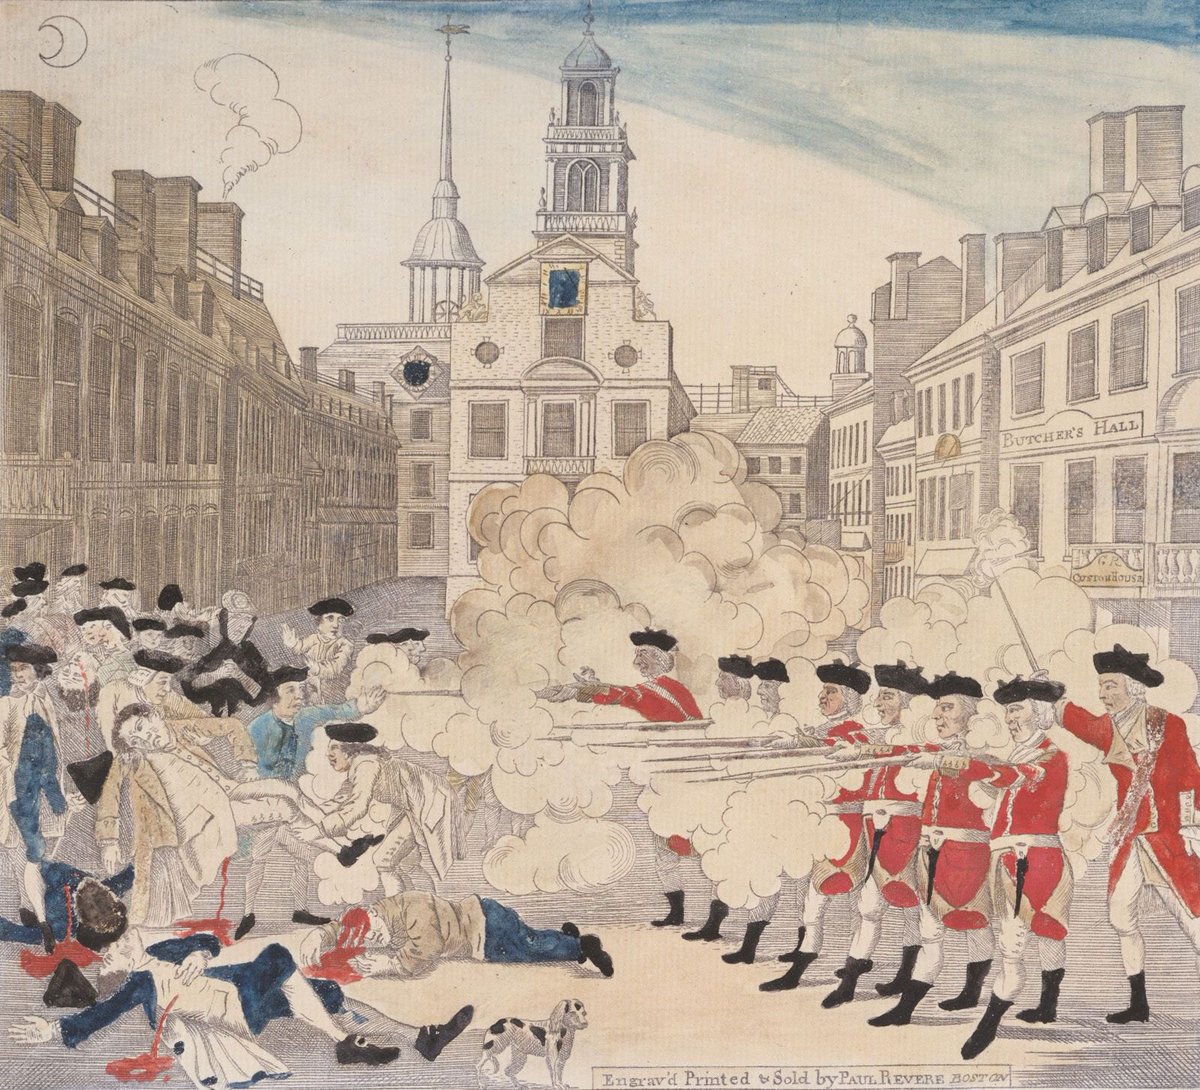 conservatives in 1770: those rabblerousers shouldn’t have provoked our fine boys in red! #BackTheRed